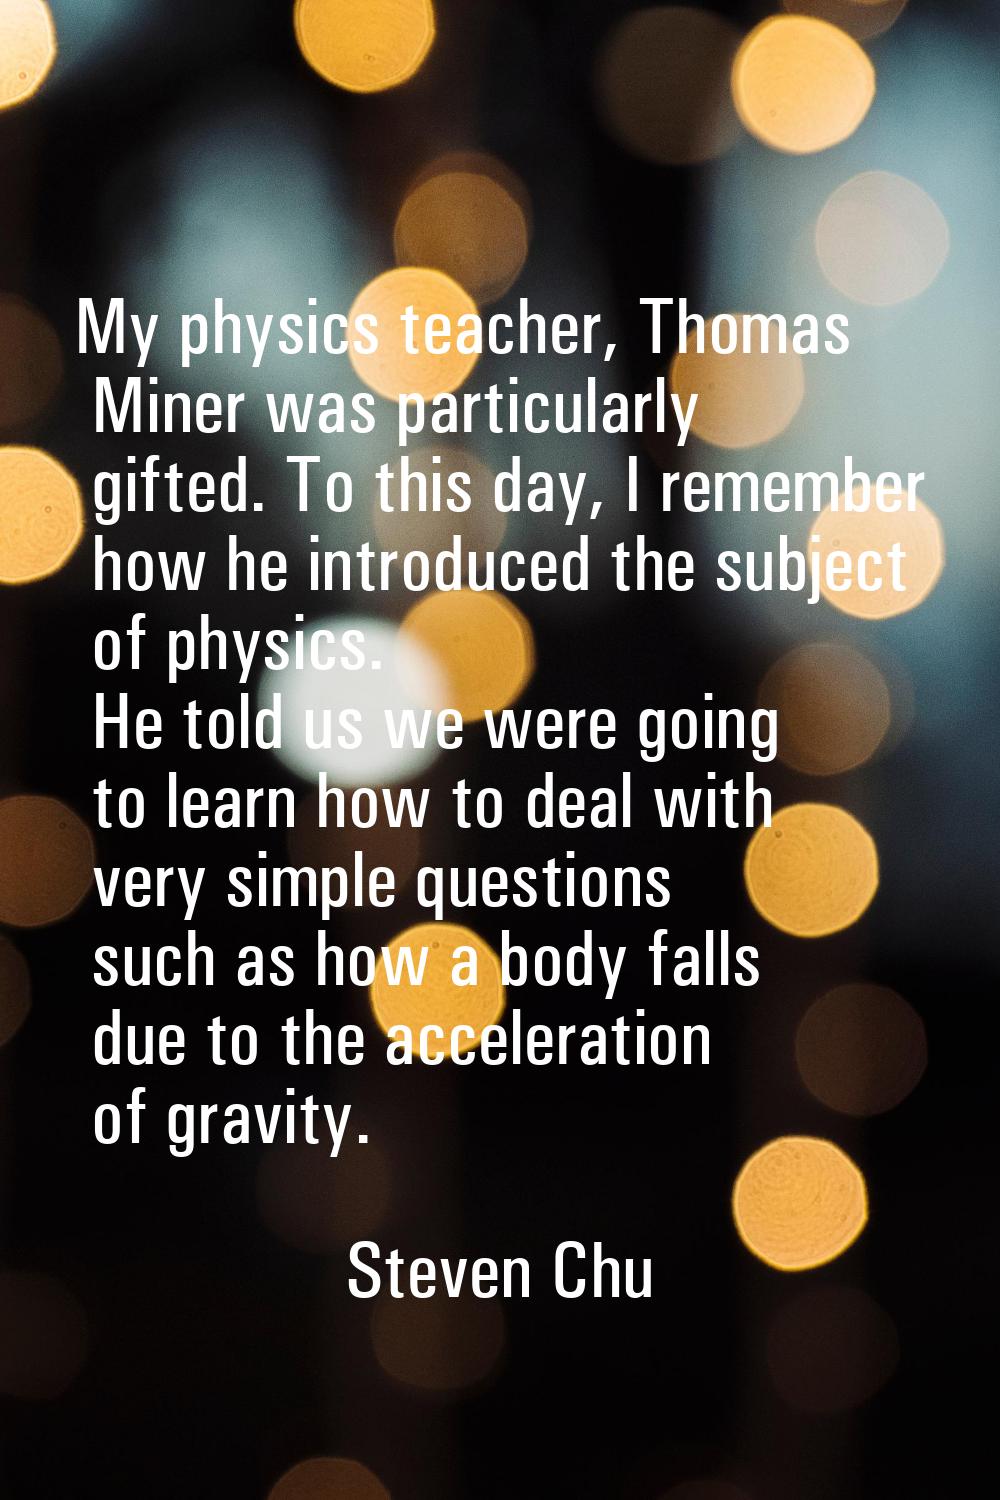 My physics teacher, Thomas Miner was particularly gifted. To this day, I remember how he introduced